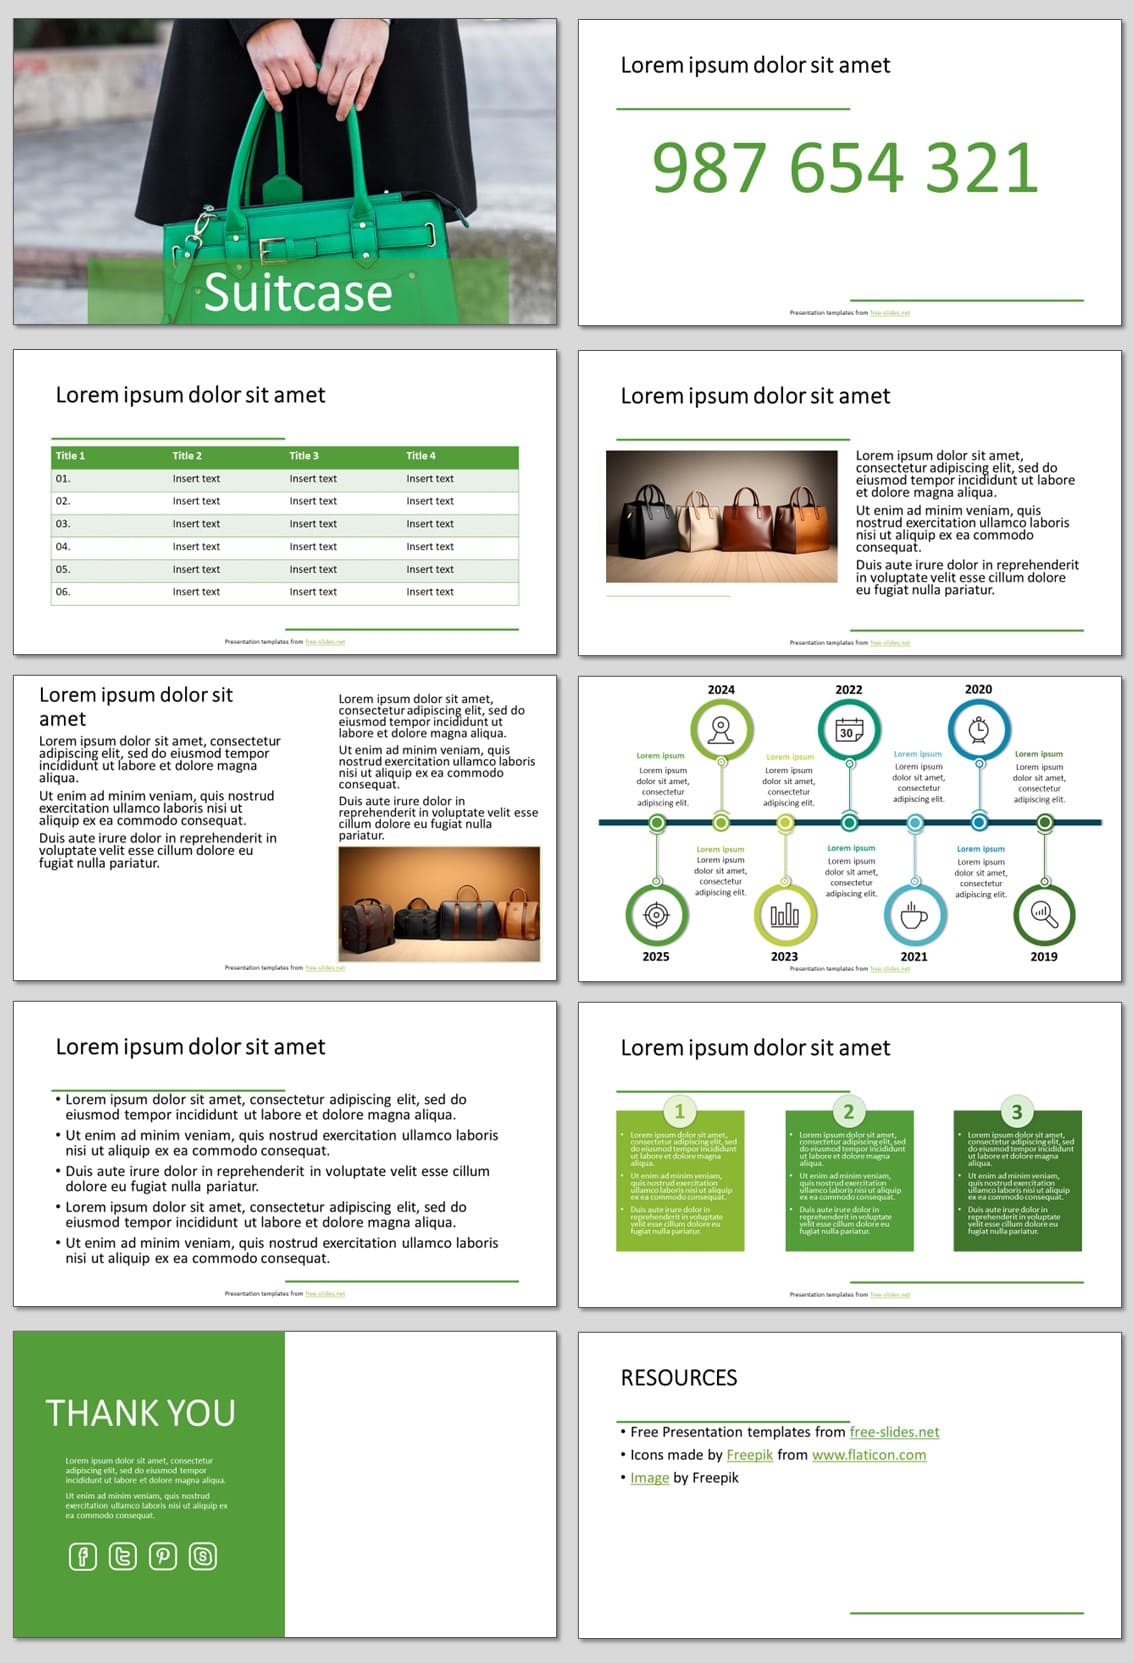 Suitcase - Free PowerPoint Template and Google Slides Theme